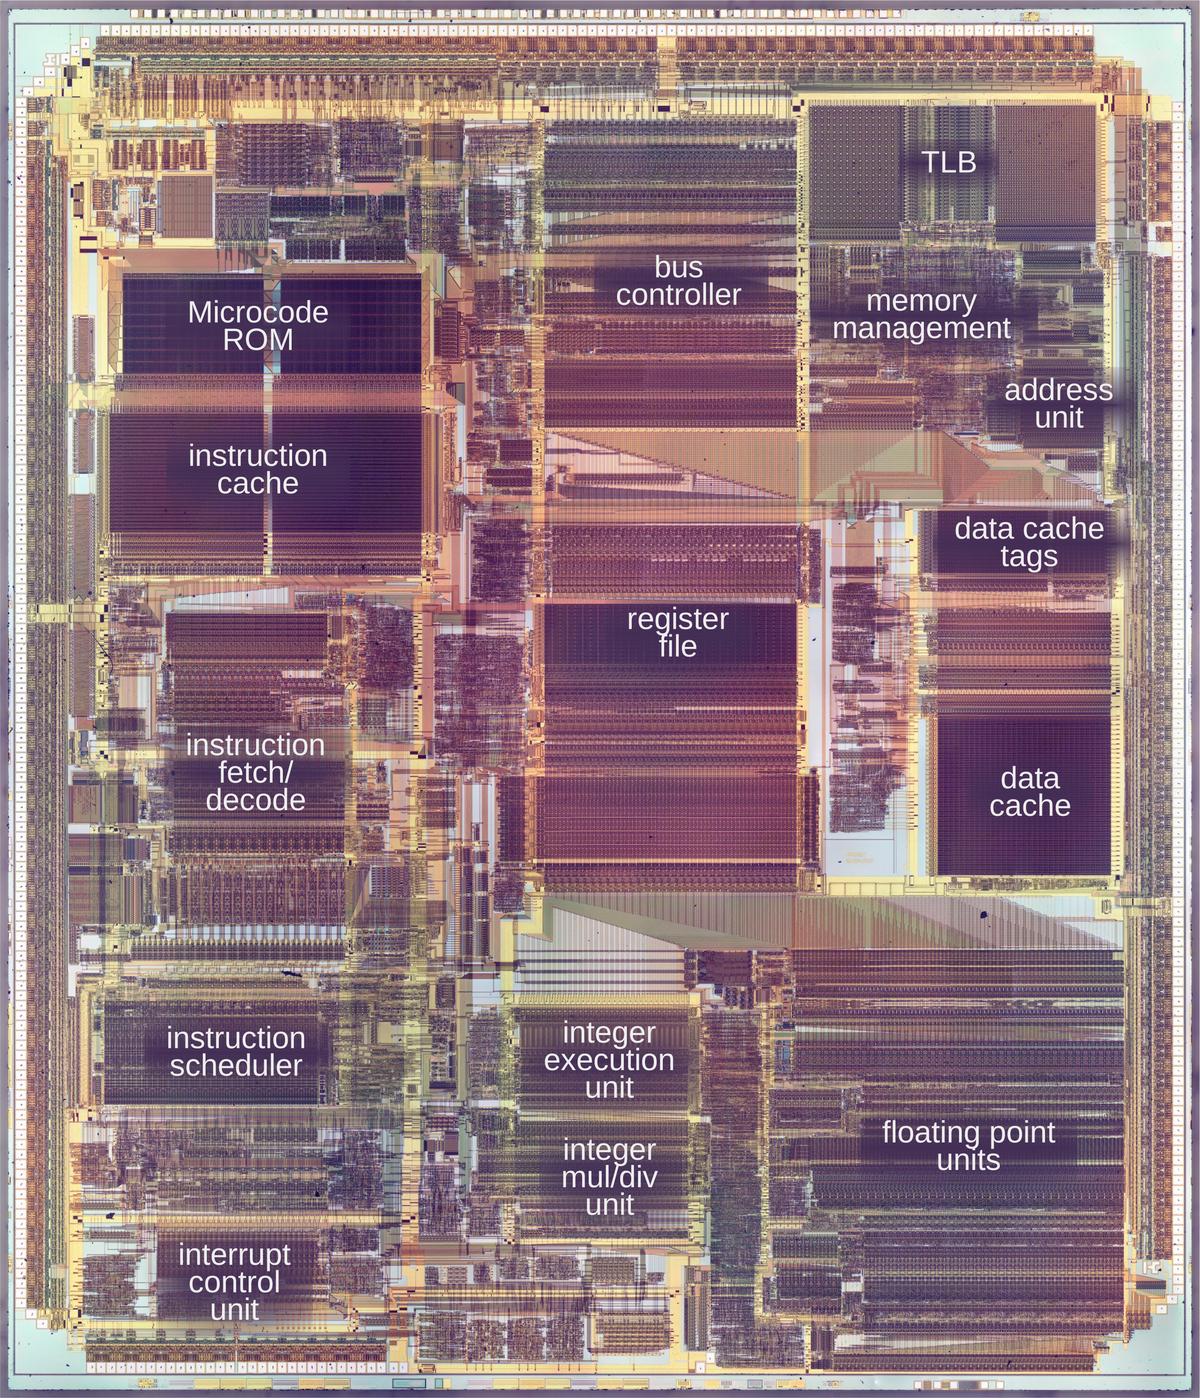 The i960MX die with the main functional blocks labeled. This is a die photo I took, with labels based on my reverse engineering.